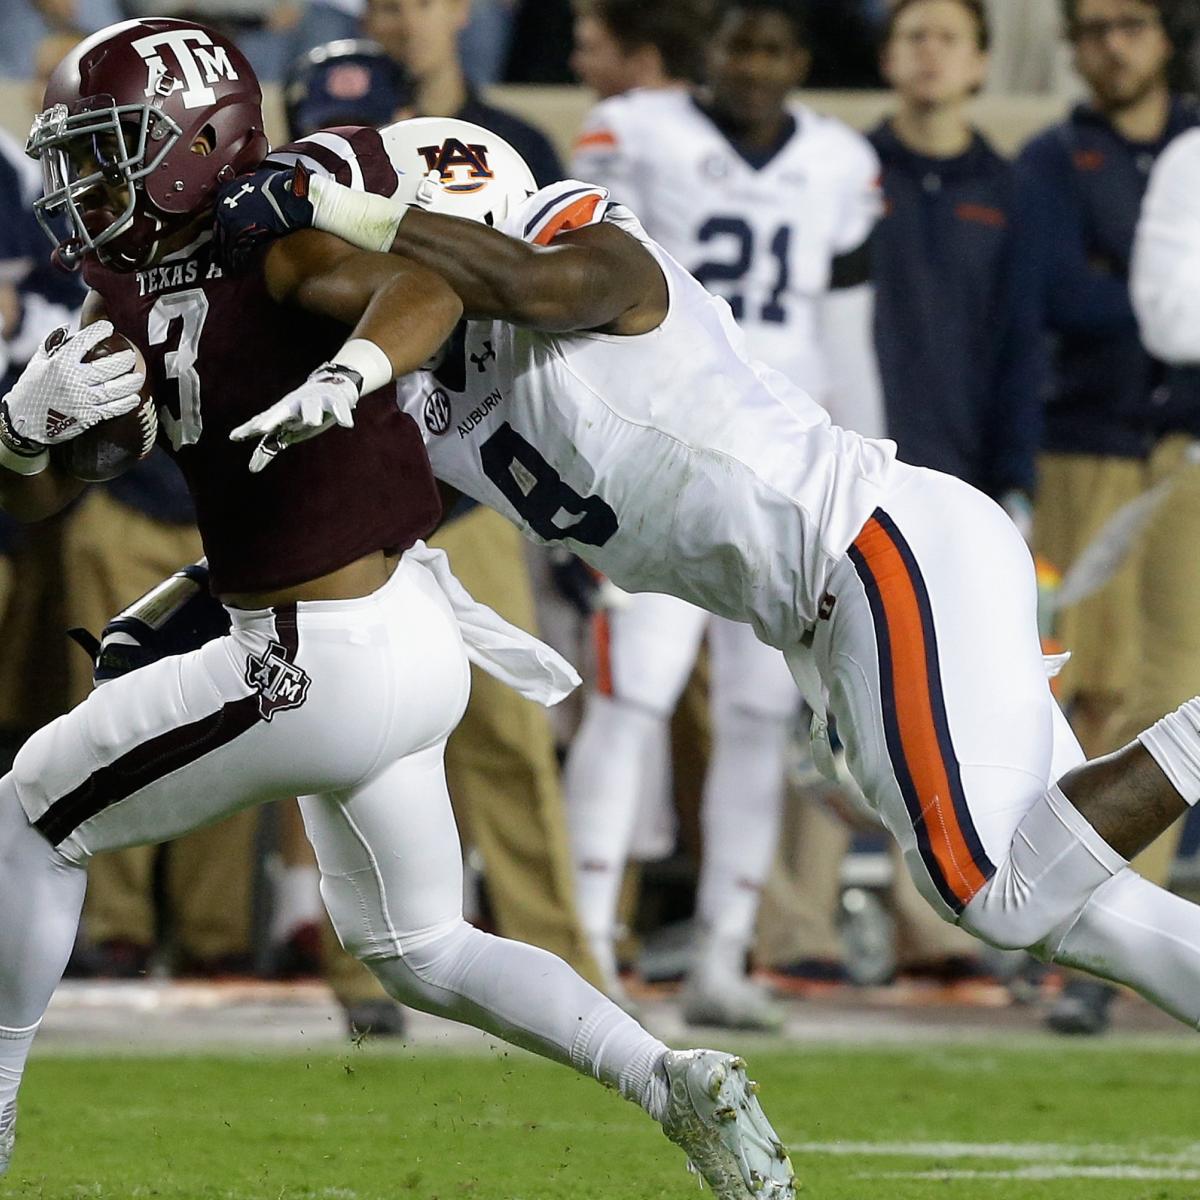 Texas A&M vs. Auburn Game Preview, Prediction and Players to Watch